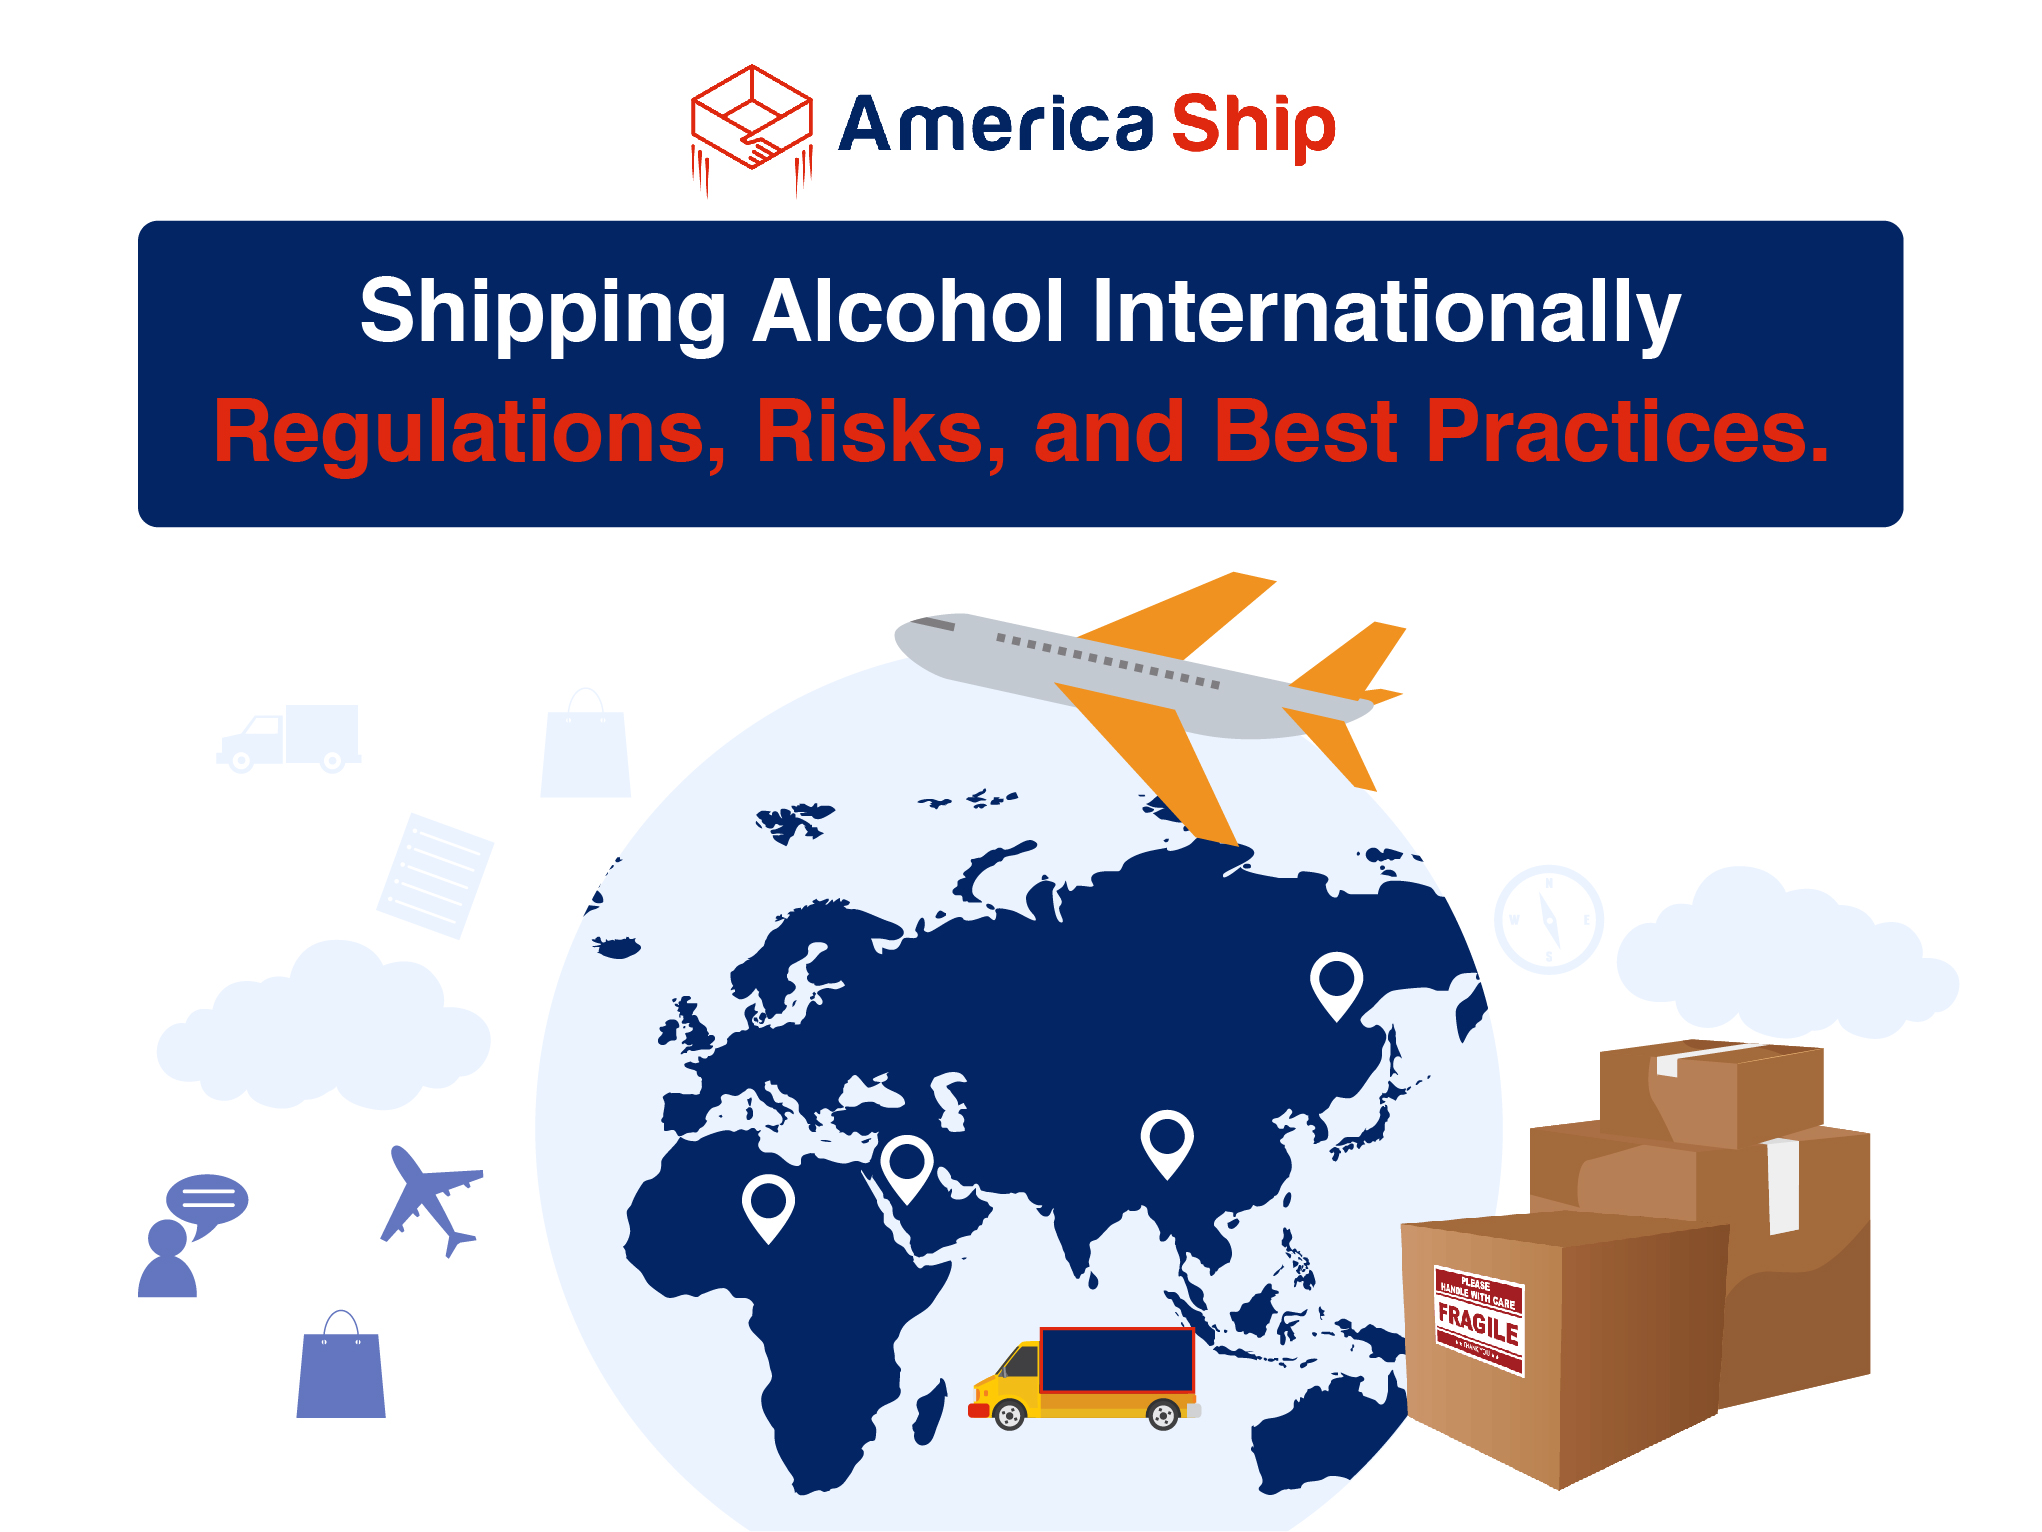 Shipping Alcohol Internationally: Regulations, Risks, and Best Practices